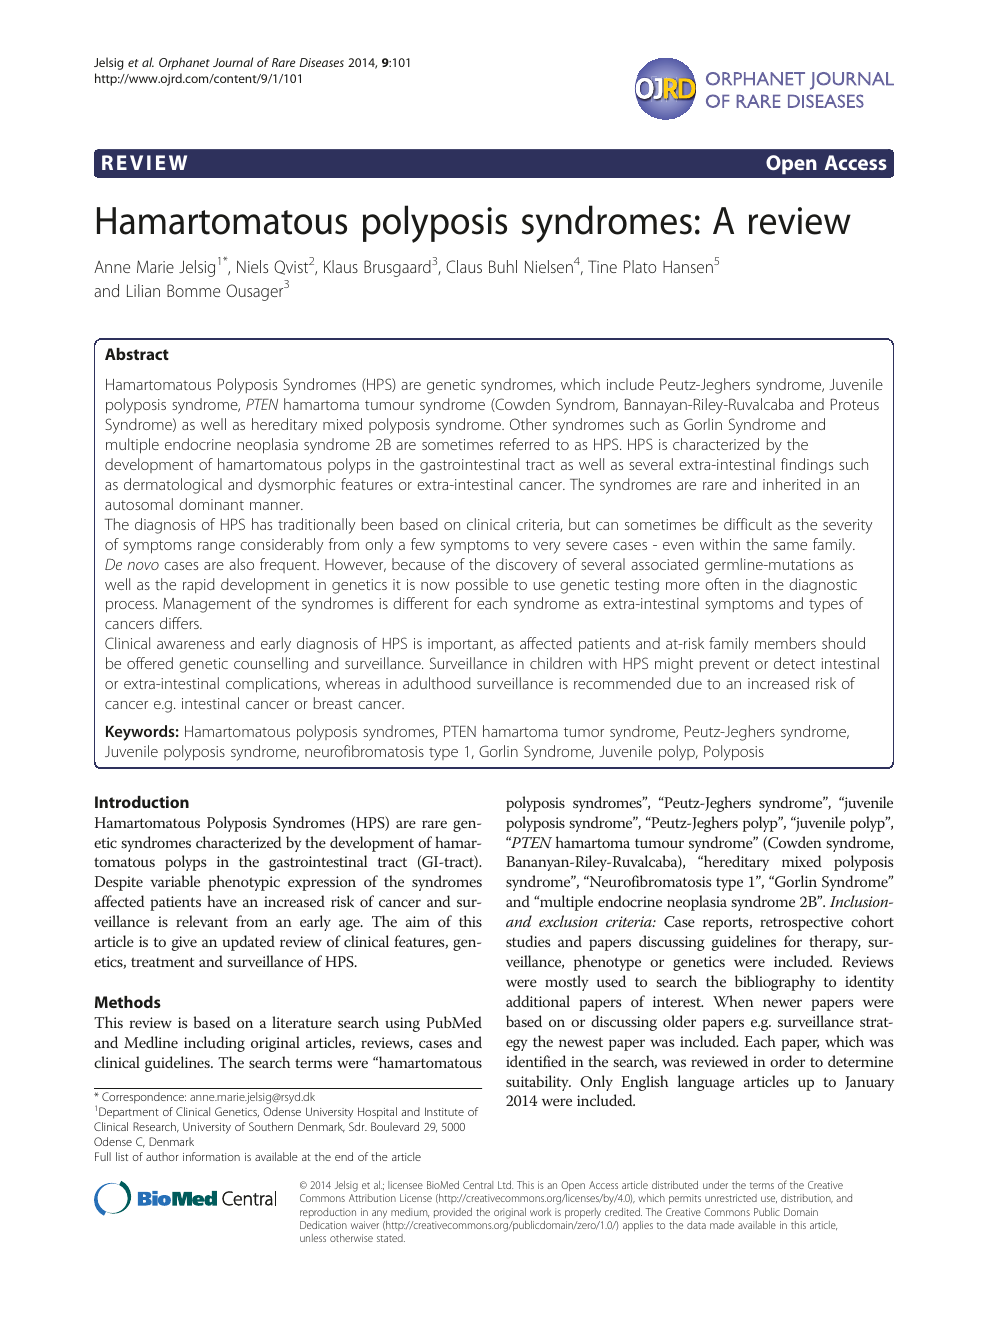 Hamartomatous Polyposis Syndromes A Review Topic Of Research Paper In Clinical Medicine Download Scholarly Article Pdf And Read For Free On Cyberleninka Open Science Hub